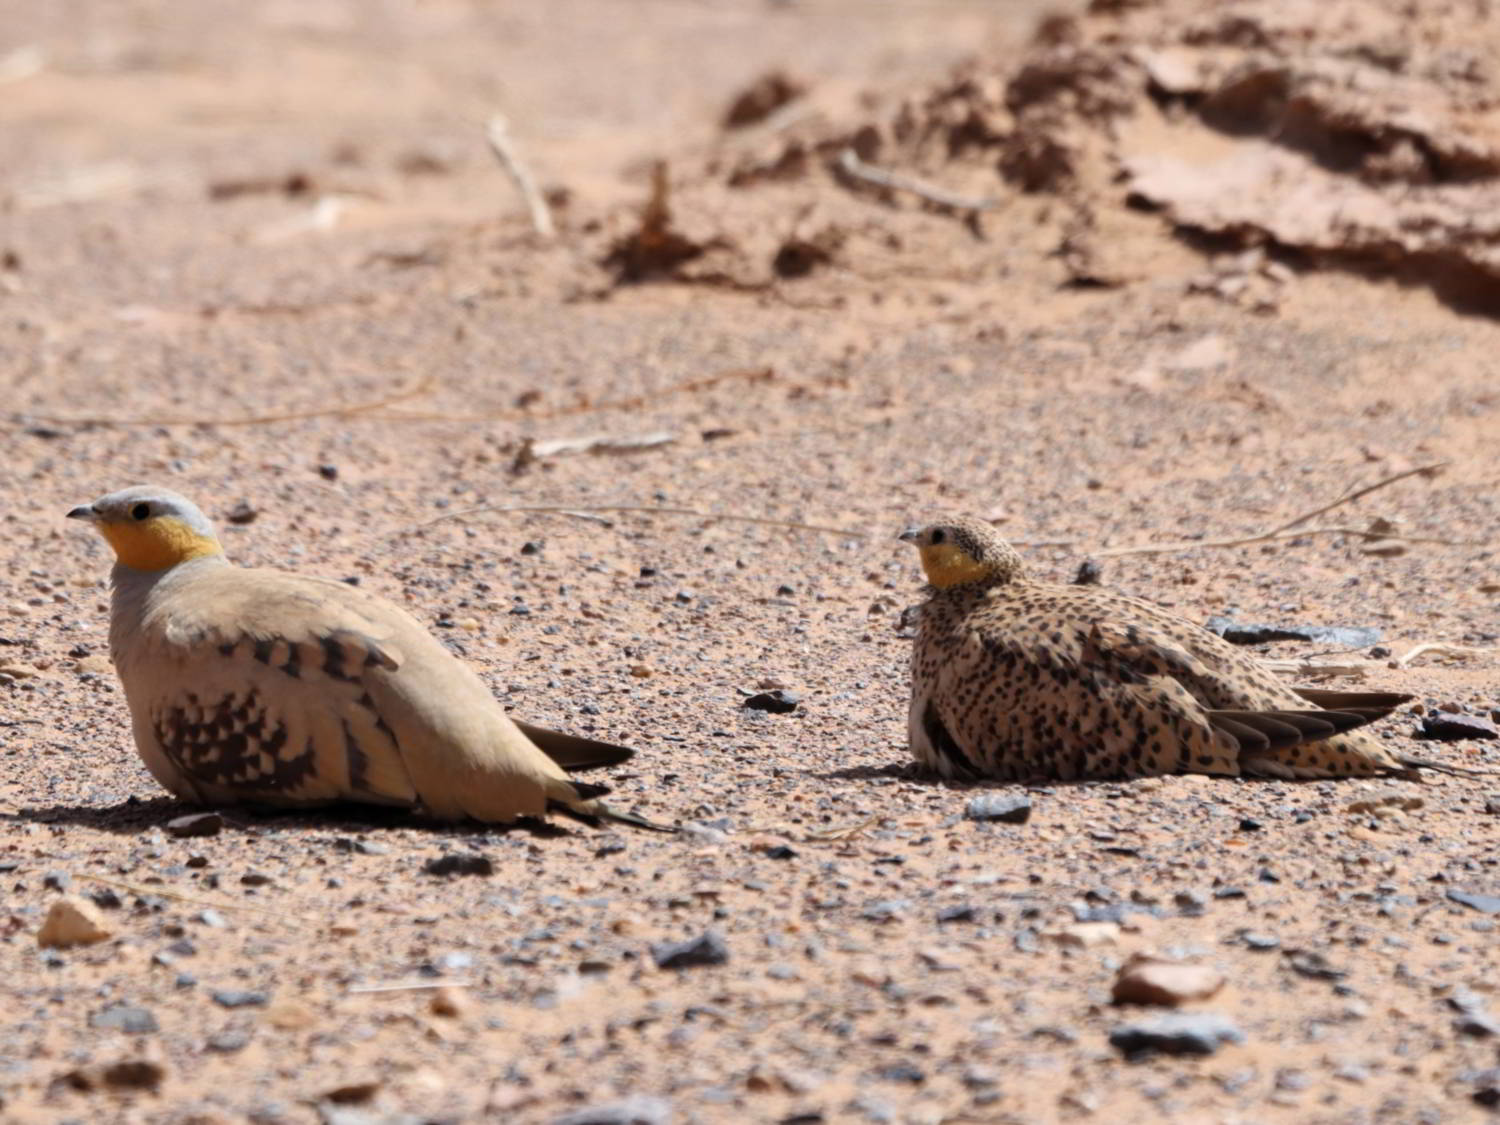 Pair of Spotted Sandgrouse on stony ground